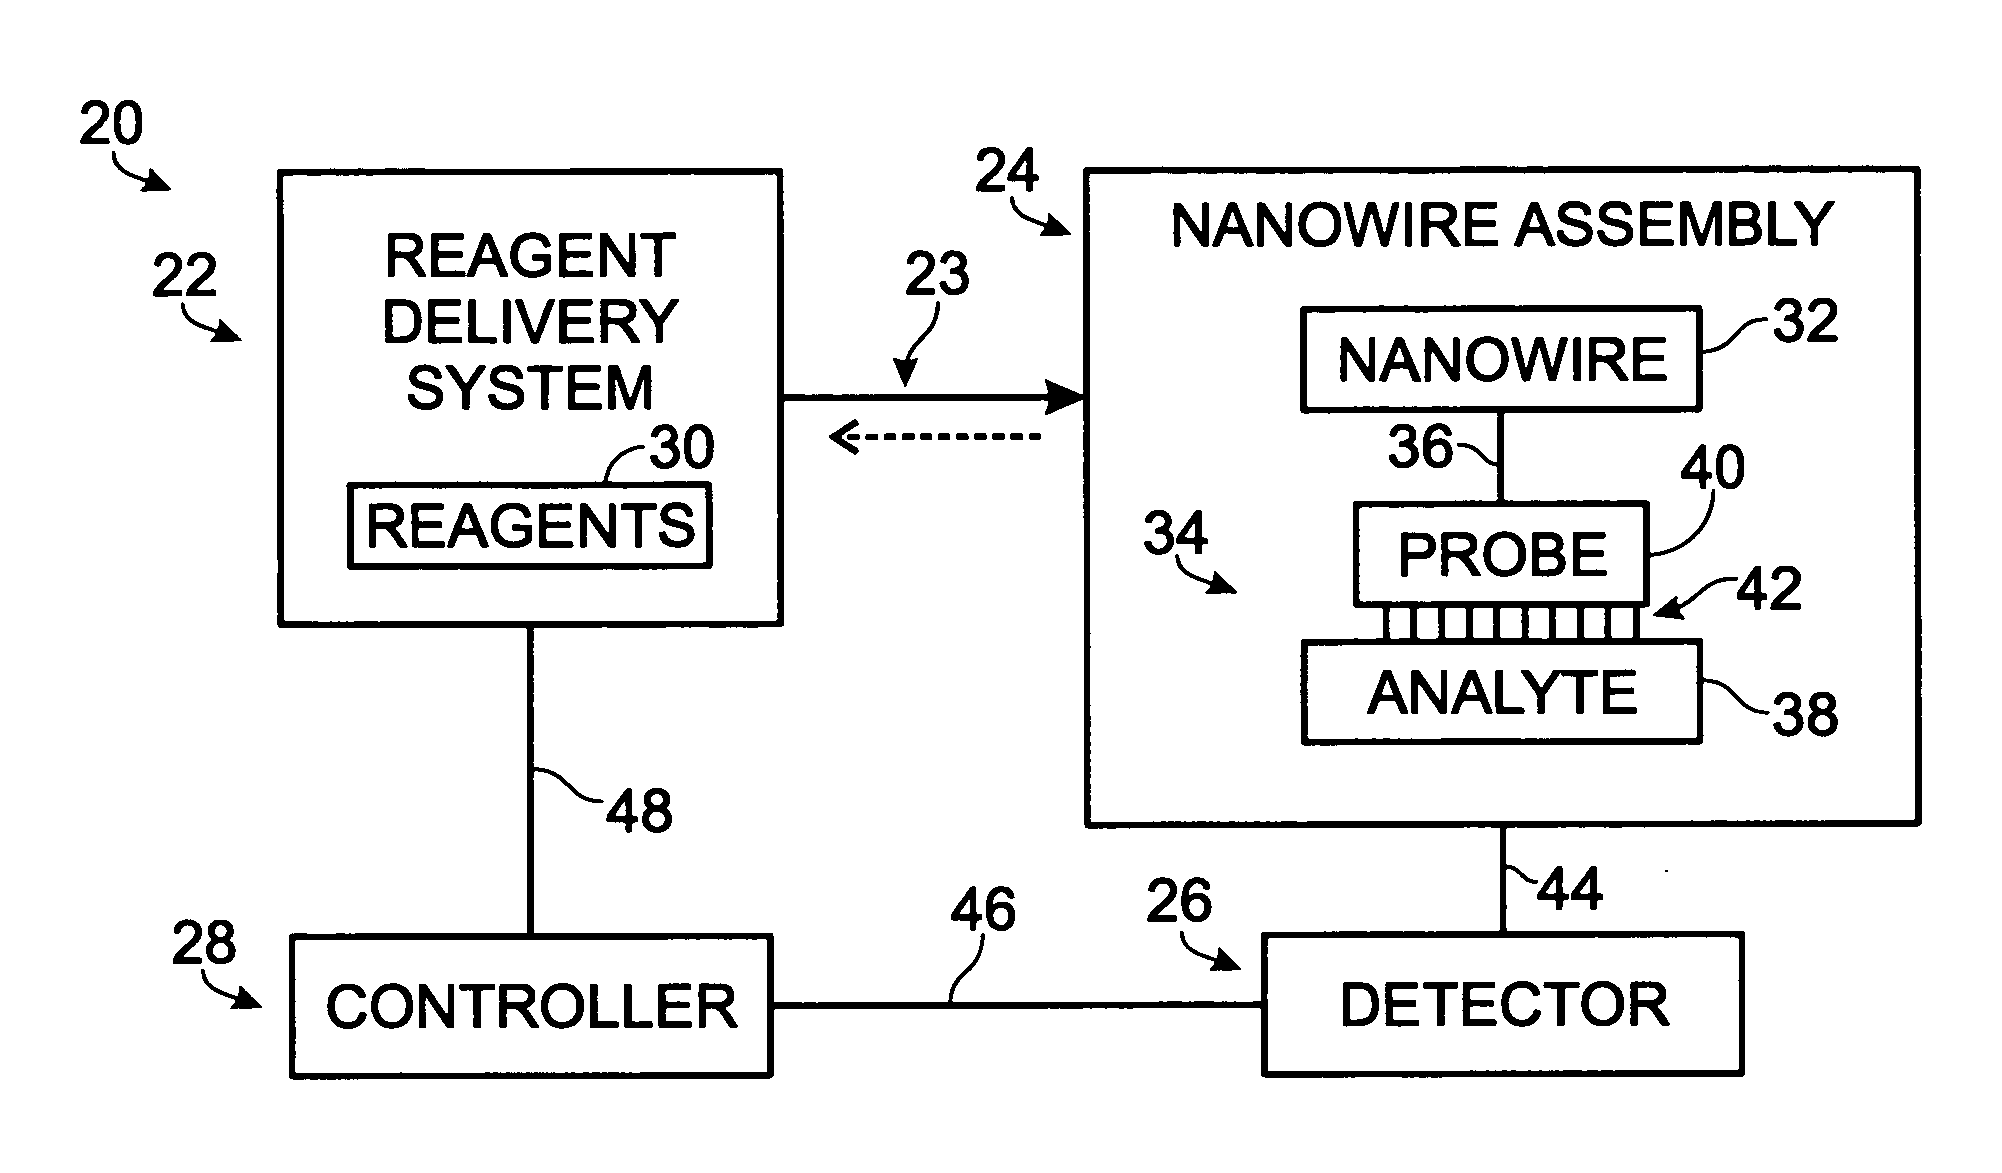 Nanowire-based system for analysis of nucleic acids